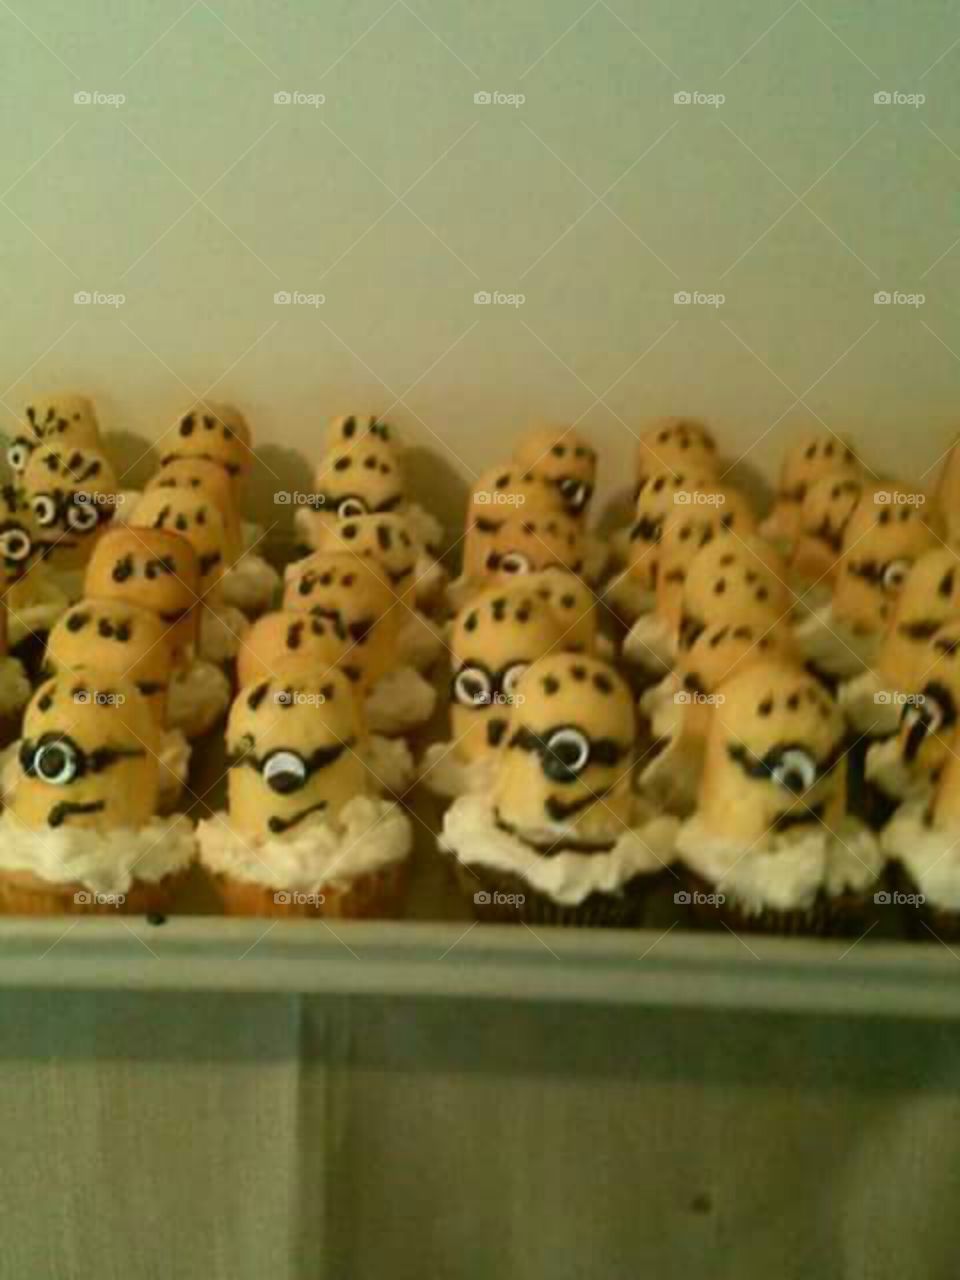 Minion Cupcakes. Cupcakes that I made with Twinkies for my son's birthday.